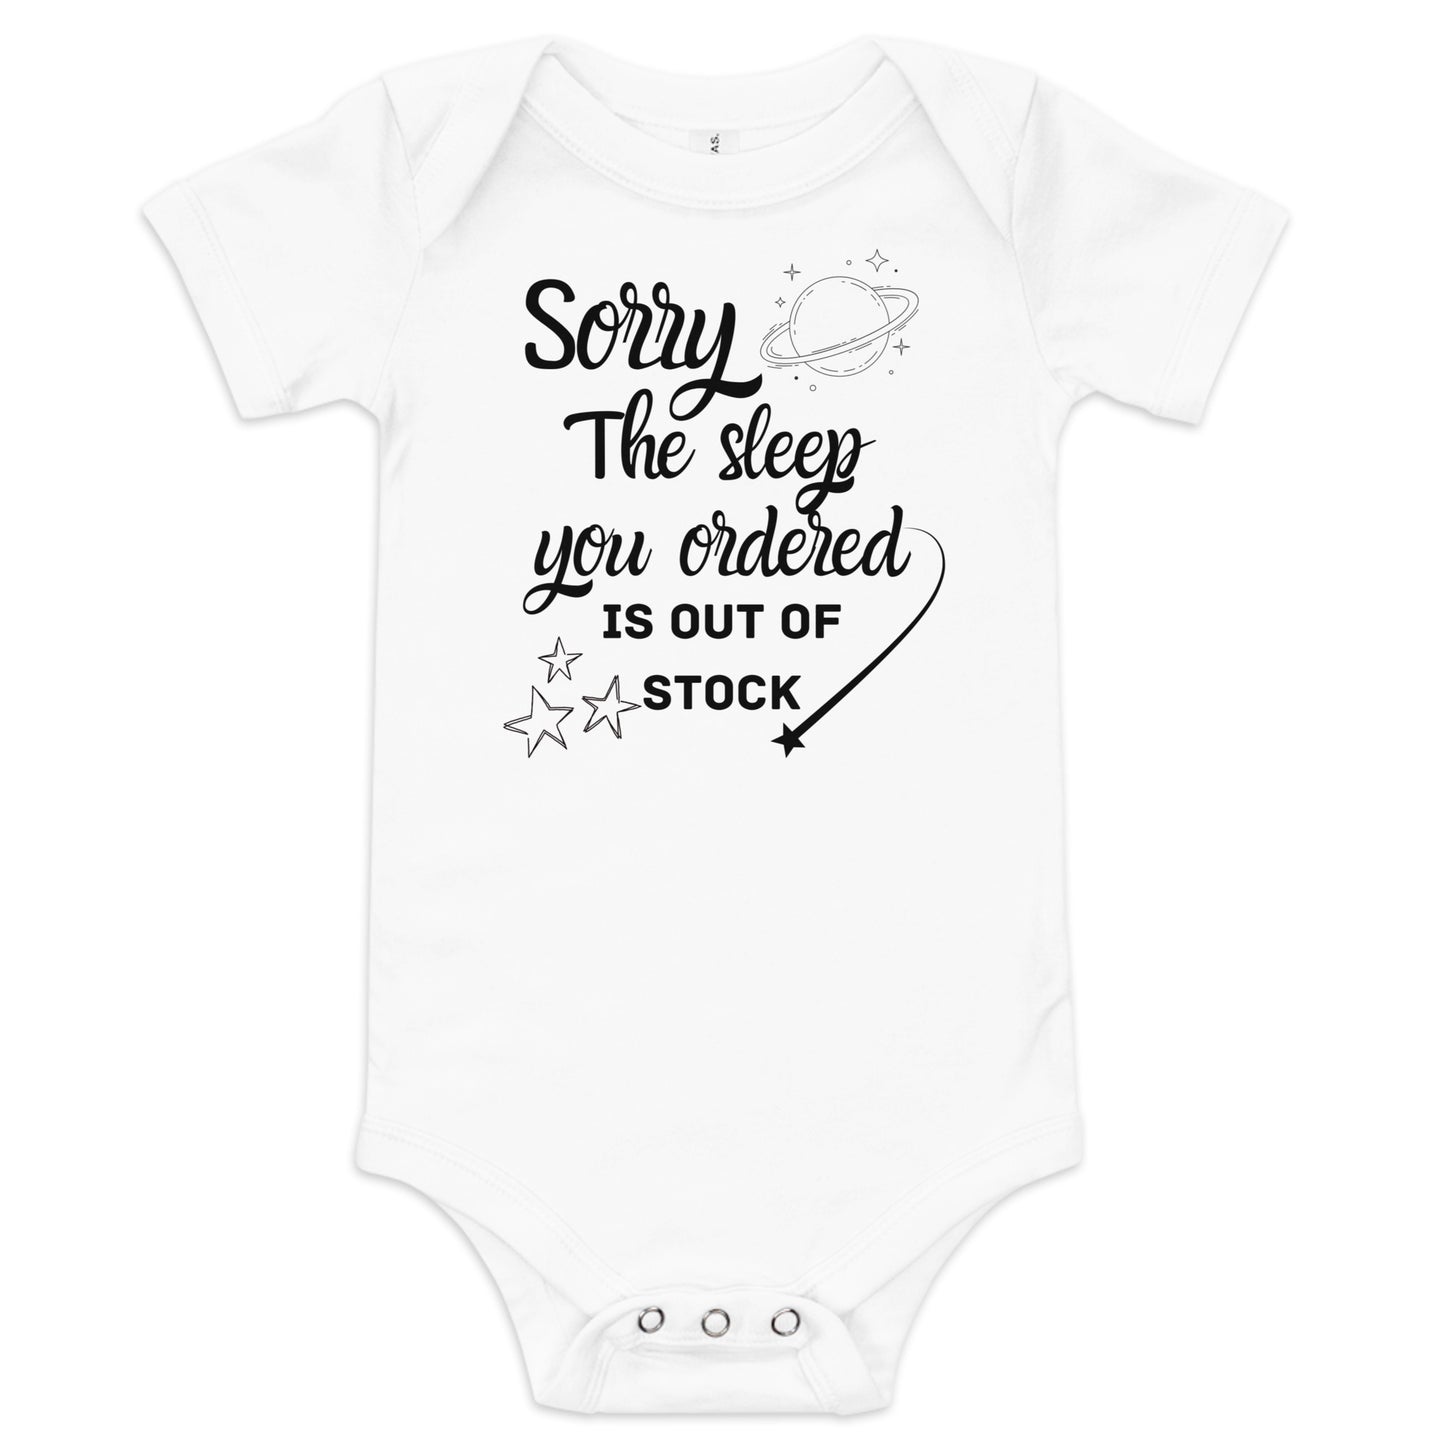 Sleep out of Stock Baby Bodysuit short sleeve one piece